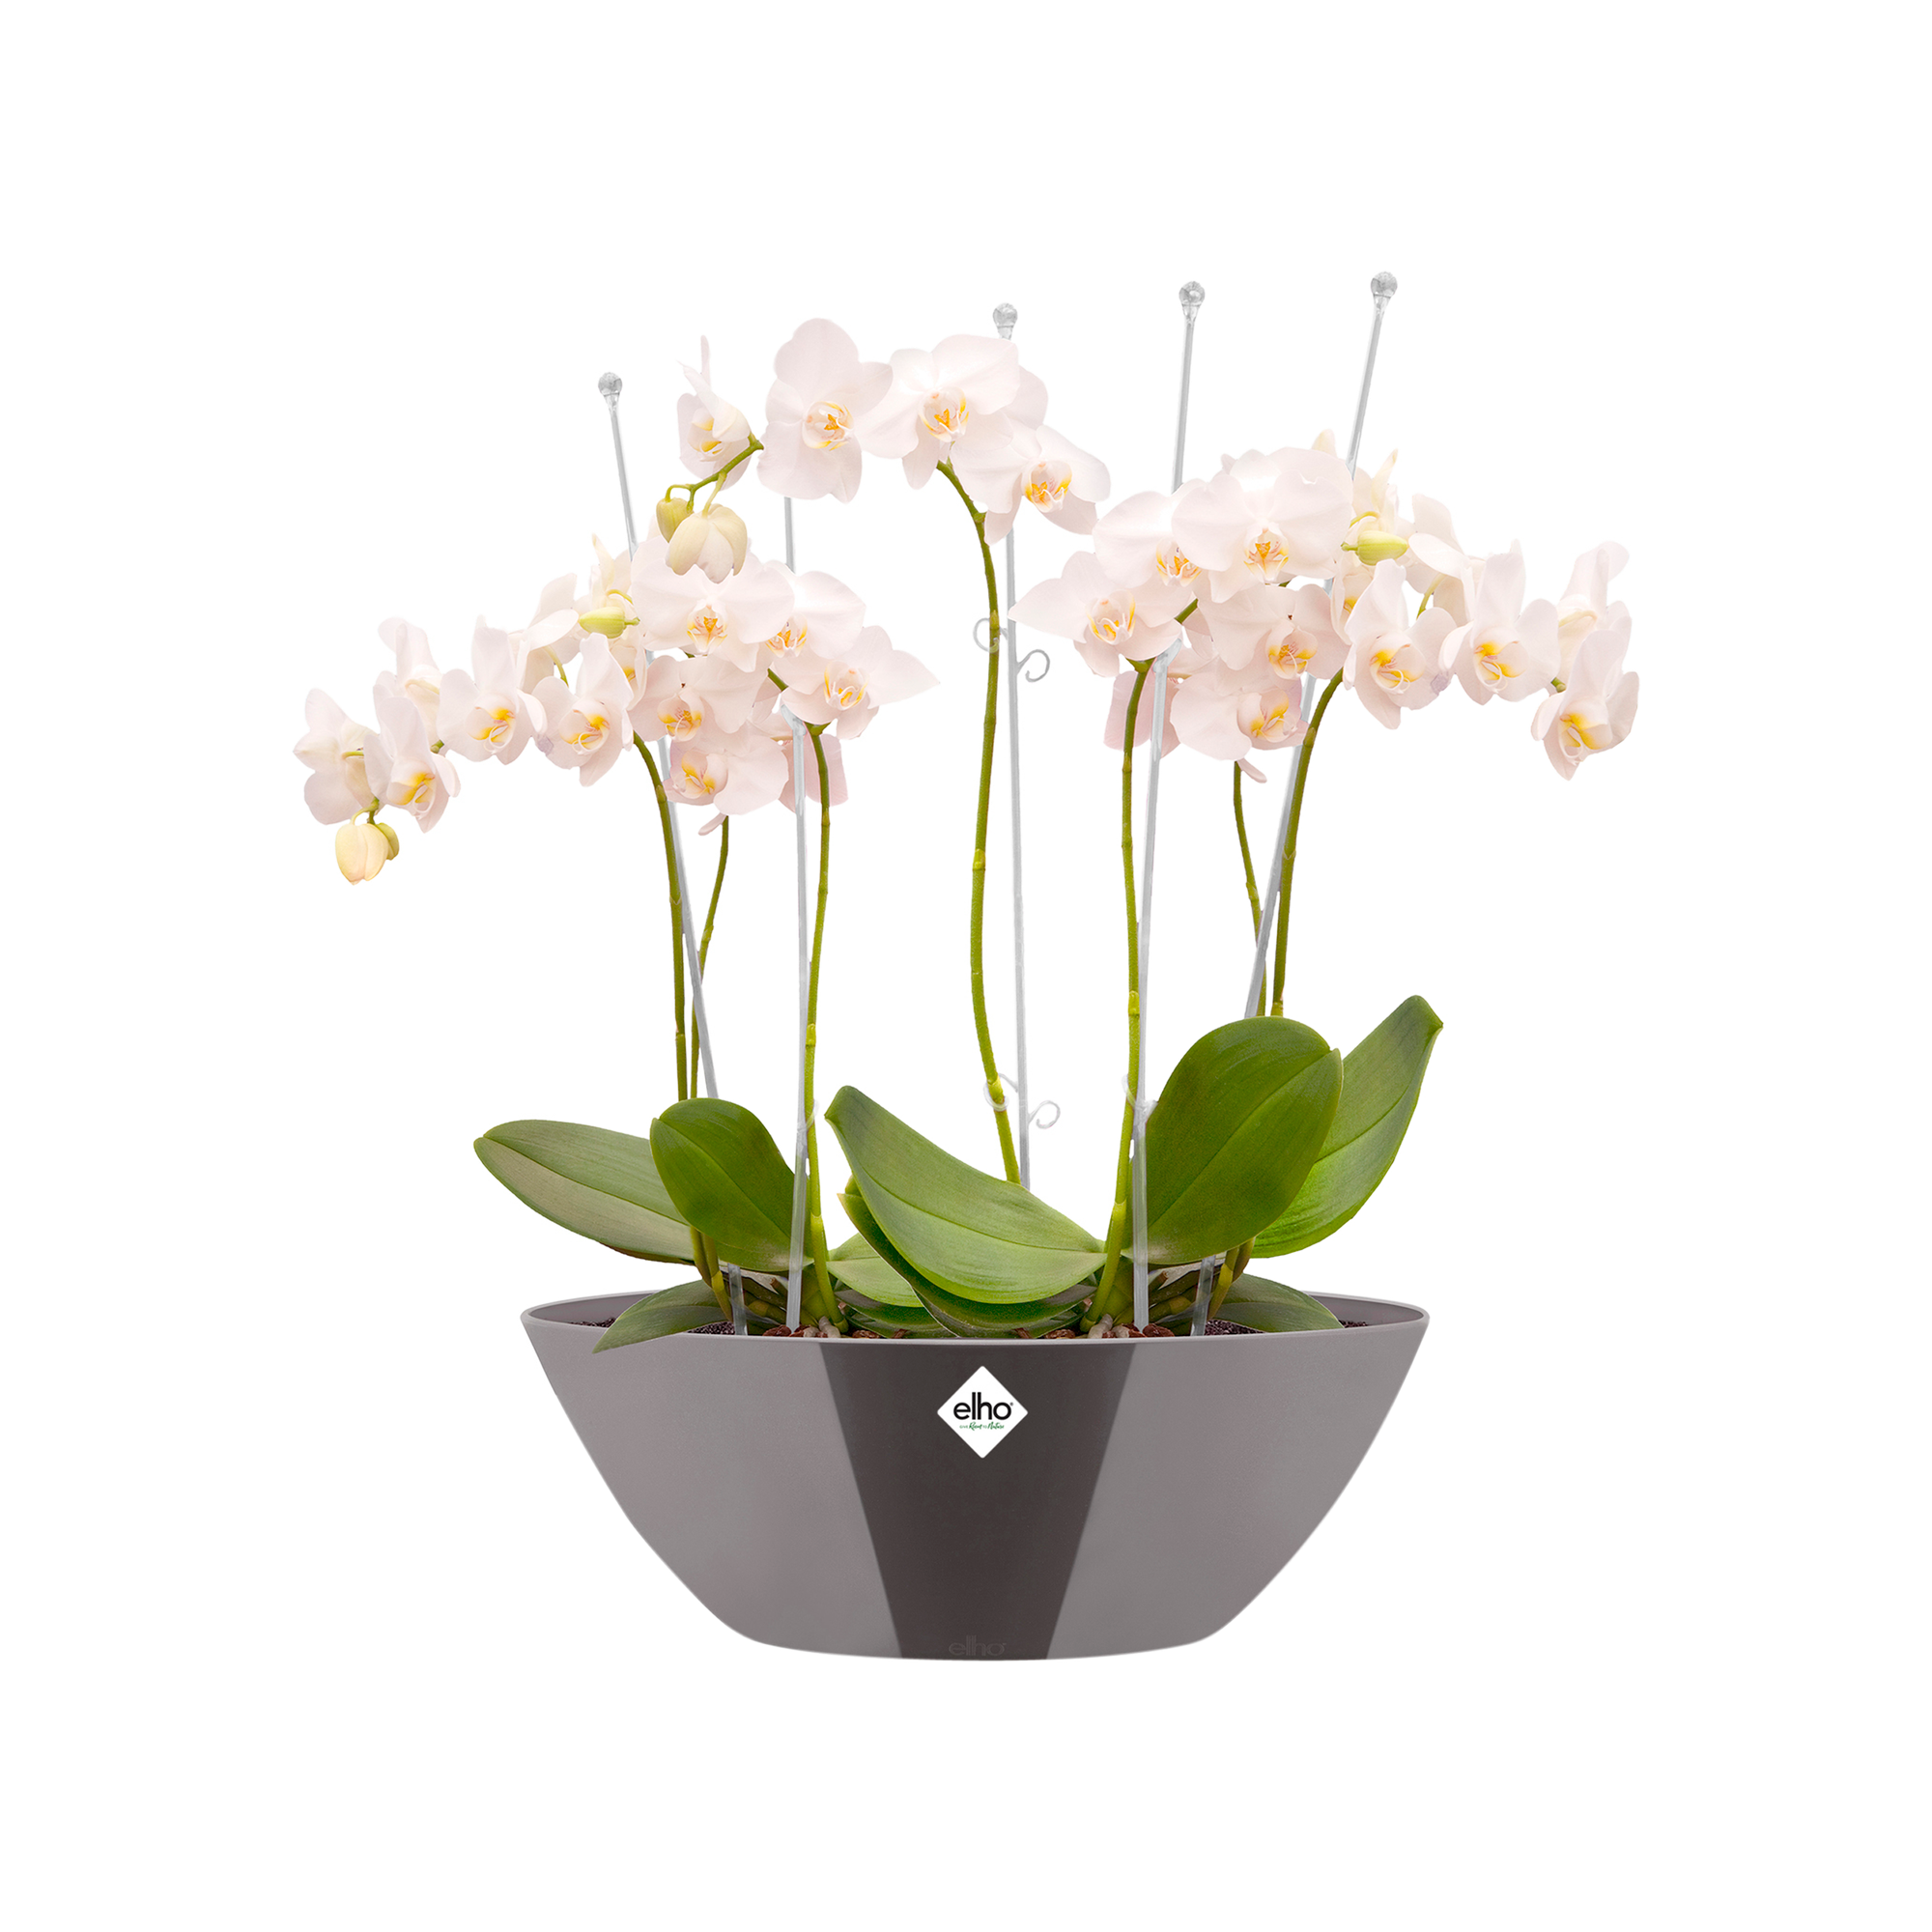 brussels diamond oval 36cm oyster pearl - elho® - Give room to nature | Blumentopfuntersetzer